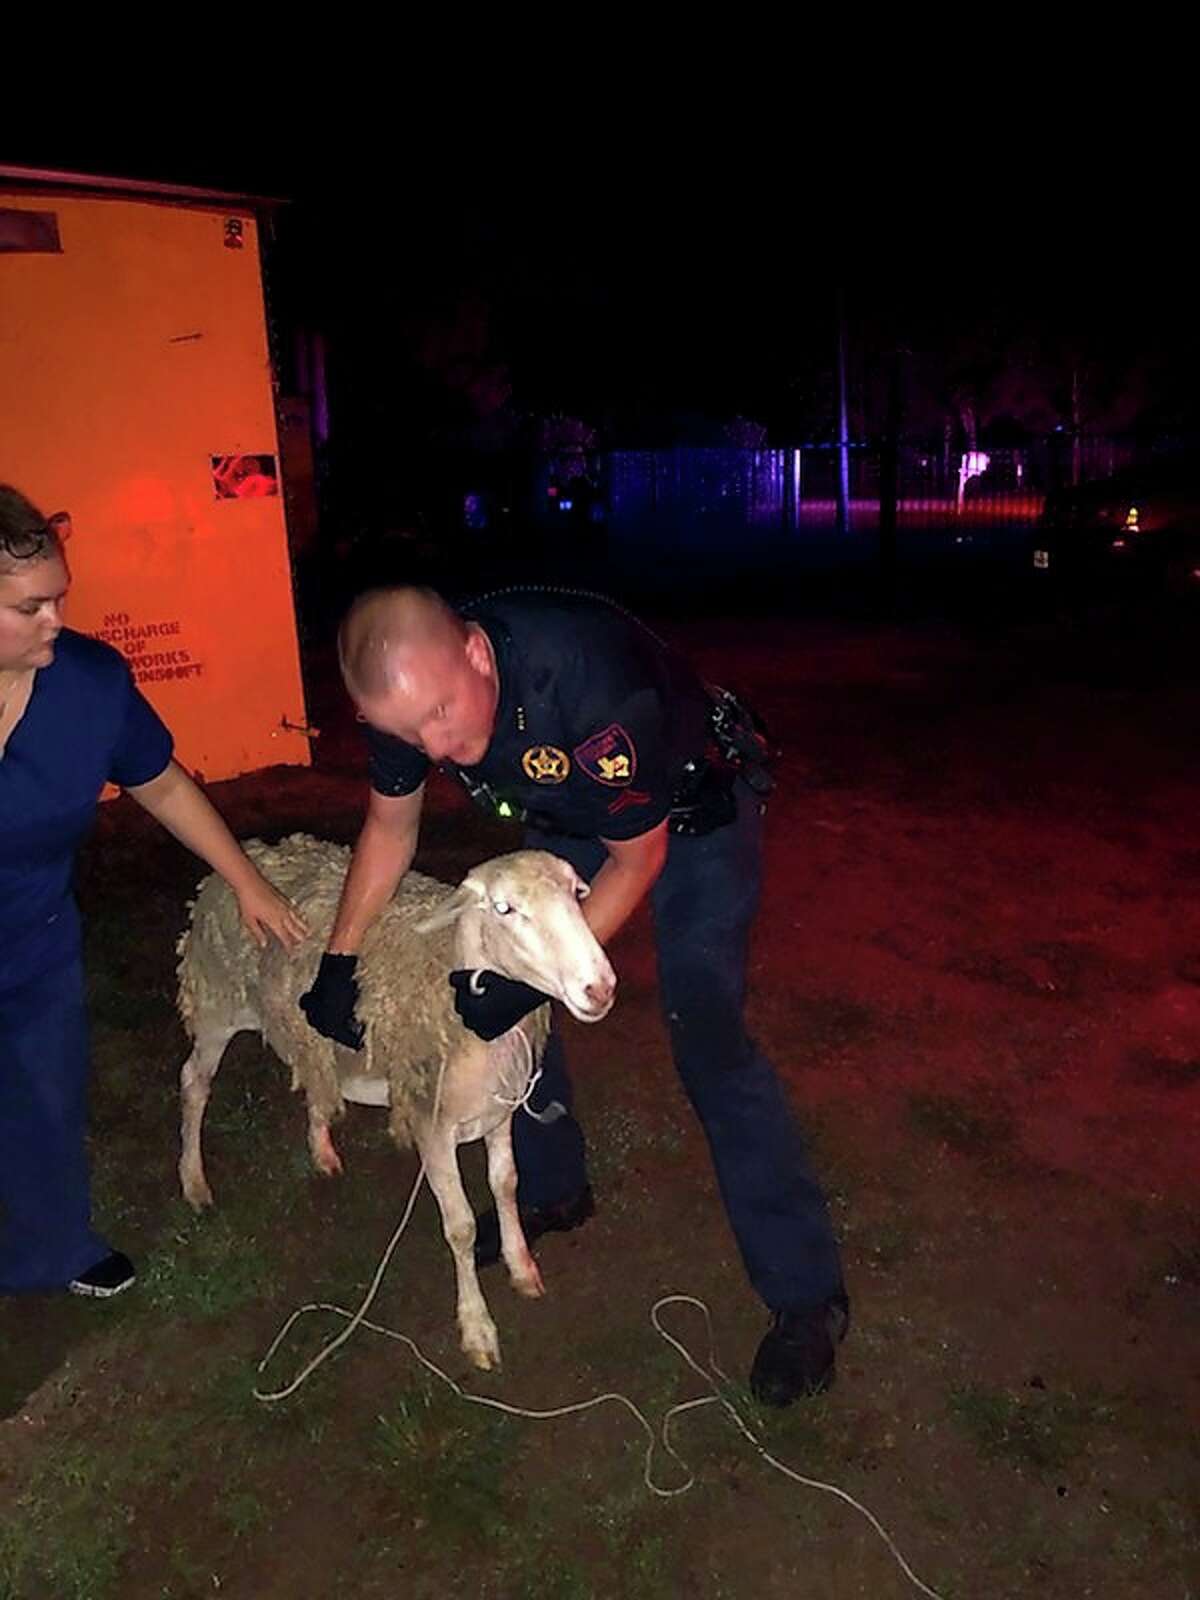 At around 2 a.m., Corporal John Baker of Harris County Constable Precinct 4 responded to reports of a loose sheep around the 2400 block of Broken Bow.